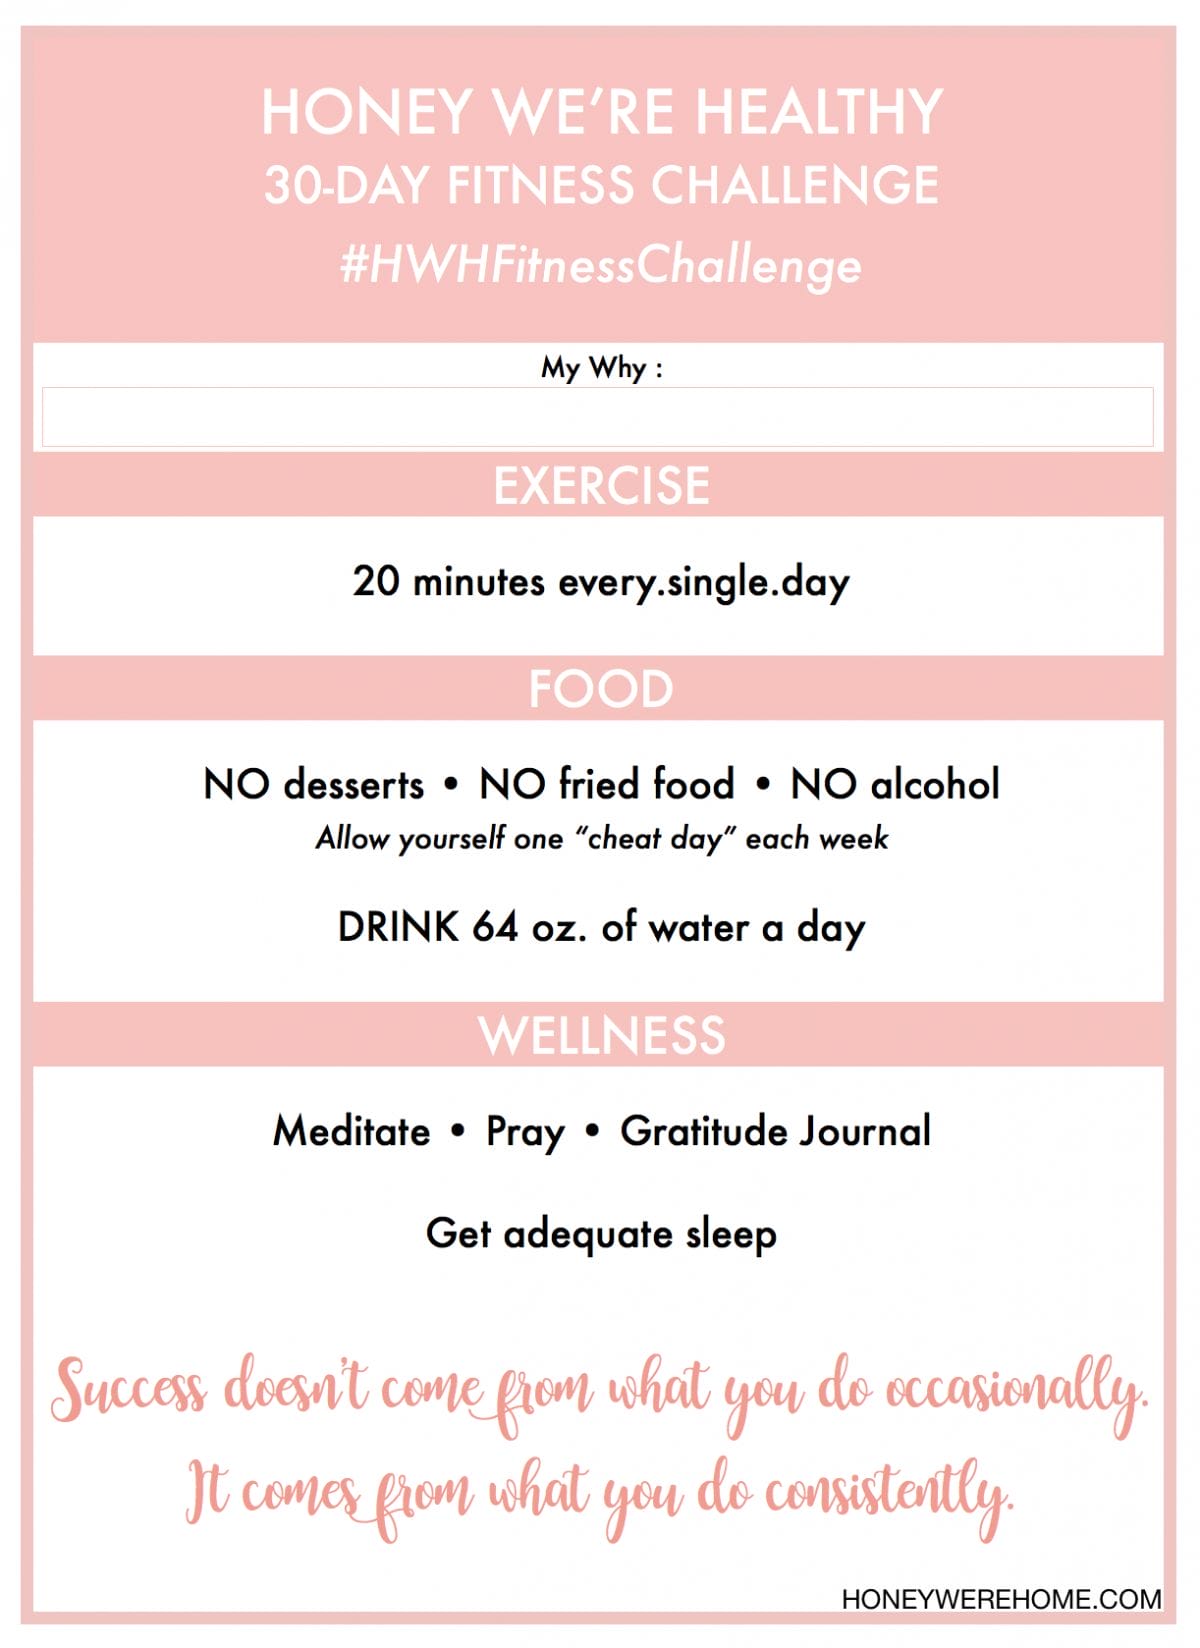 30-day fitness challenge